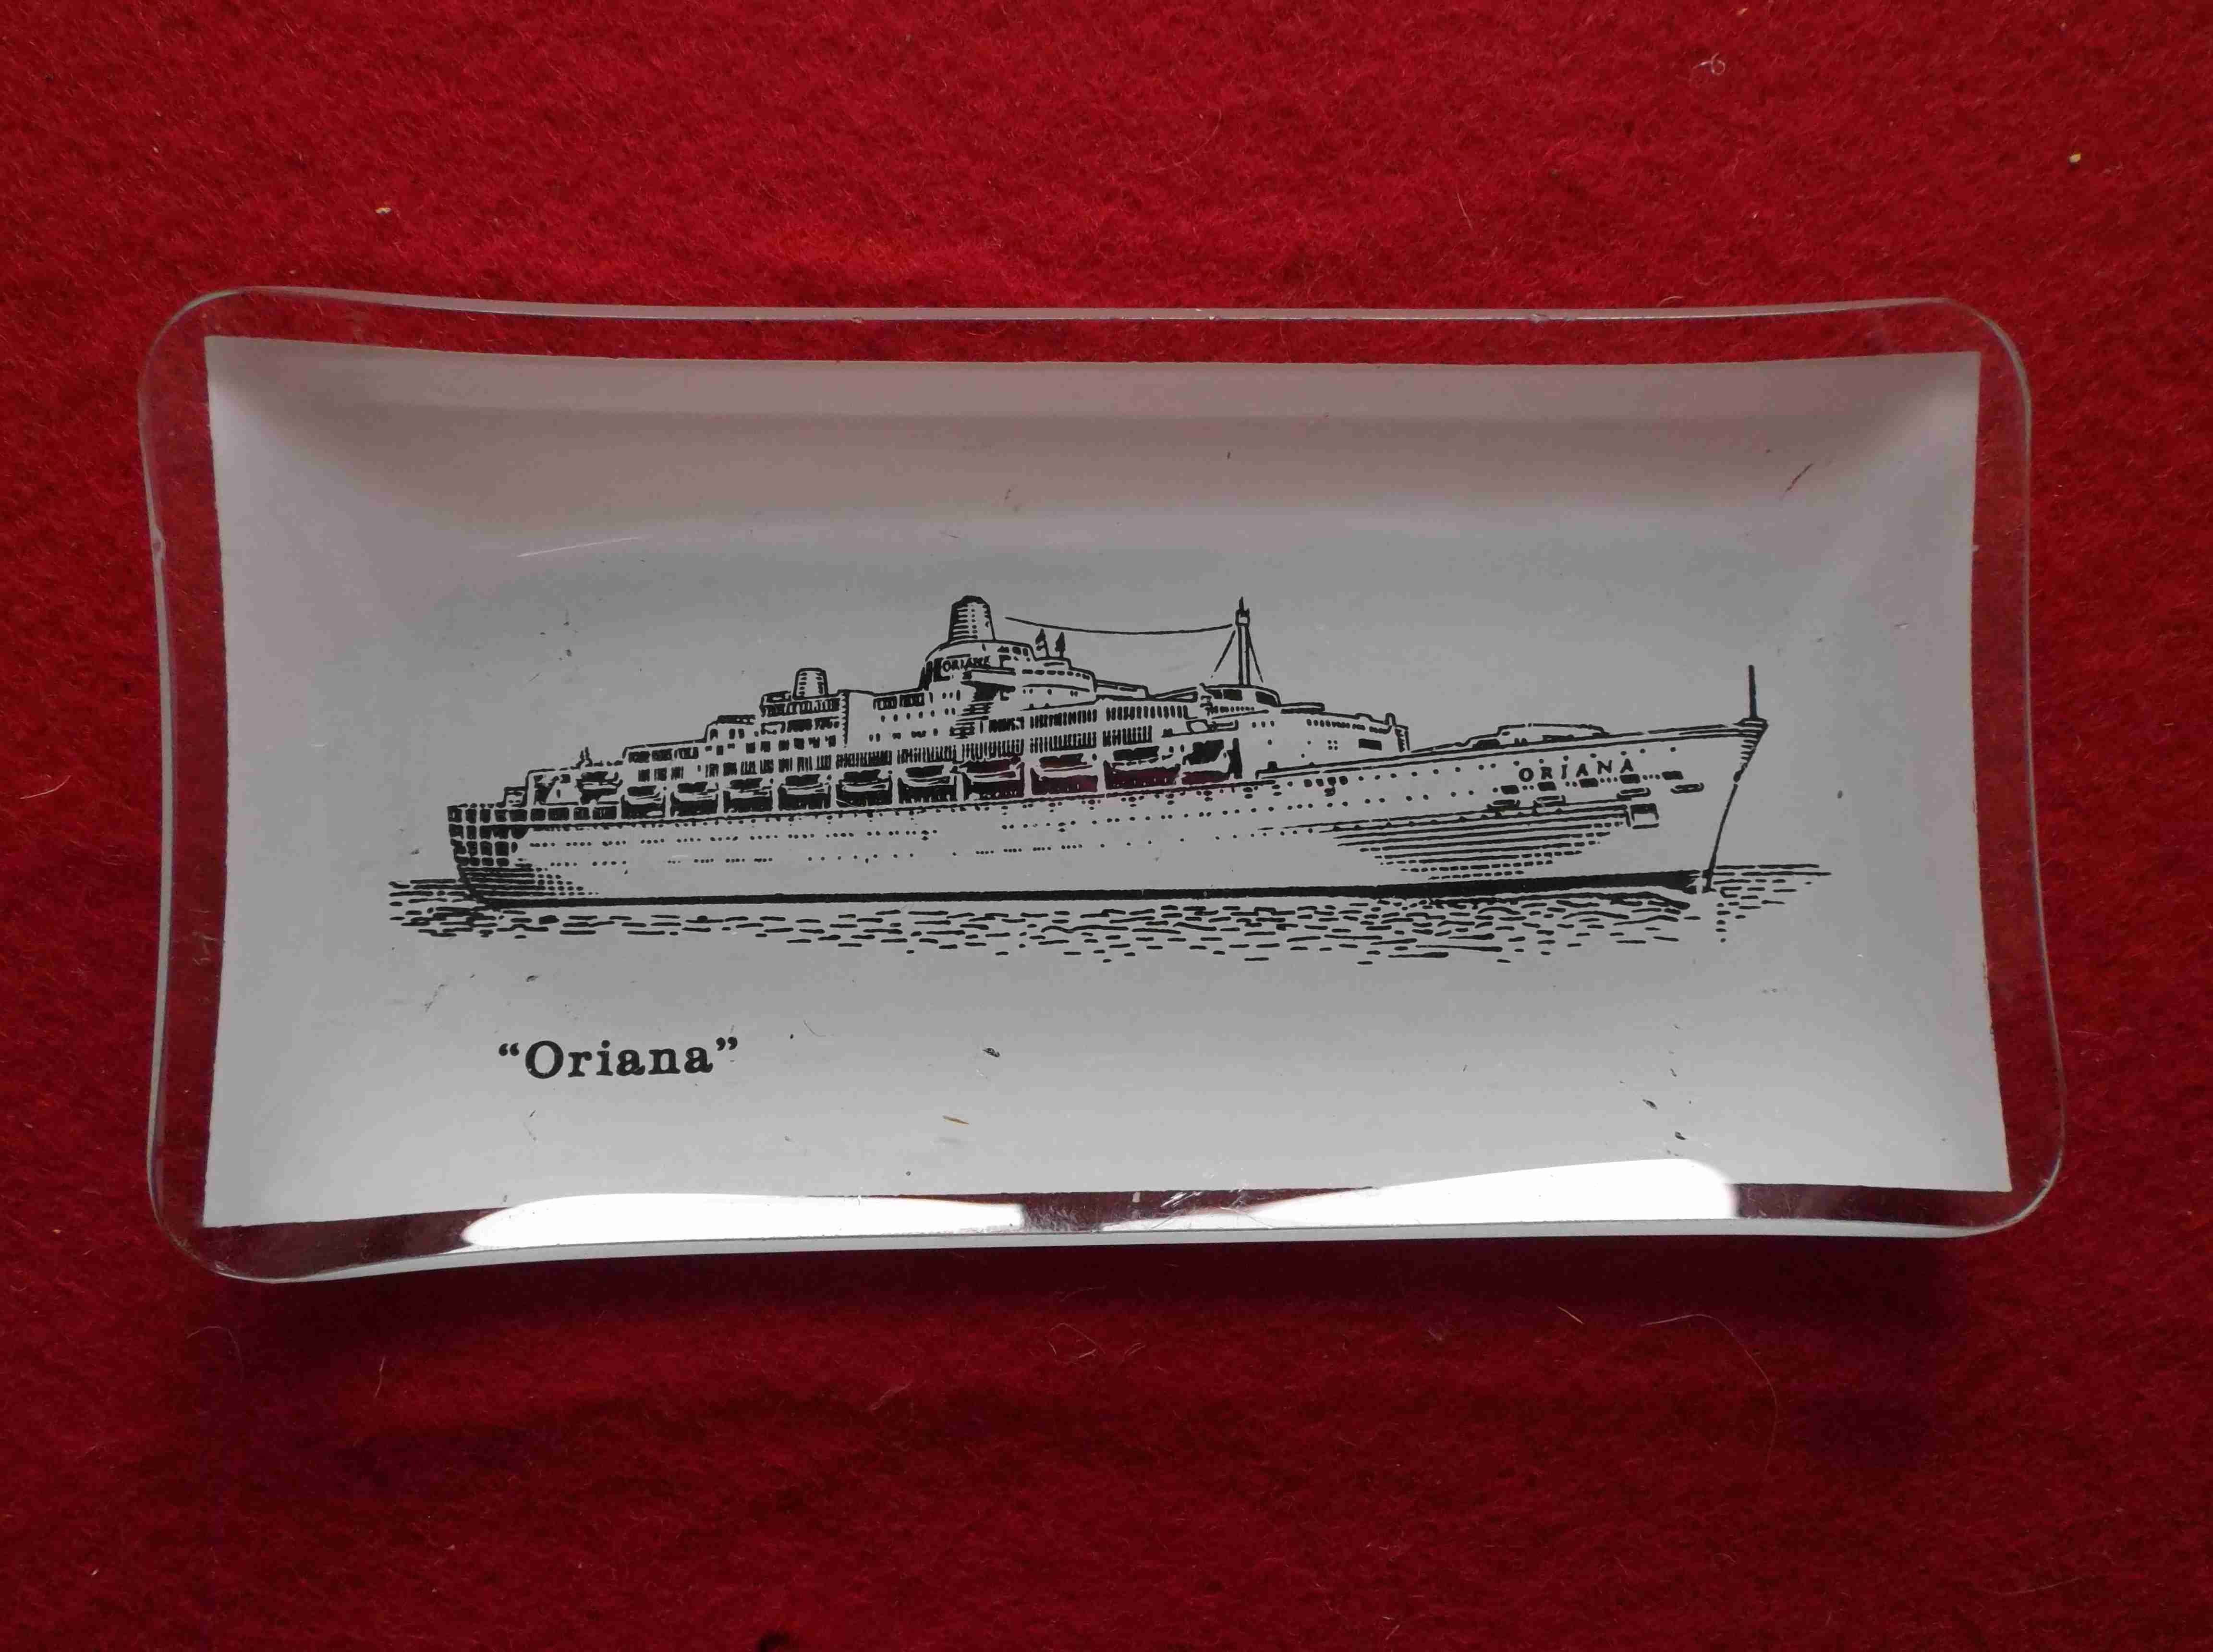 GLASS DISH SOUVENIR FROM THE ORIENT/P&O LINE VESSEL THE SS ORIANA